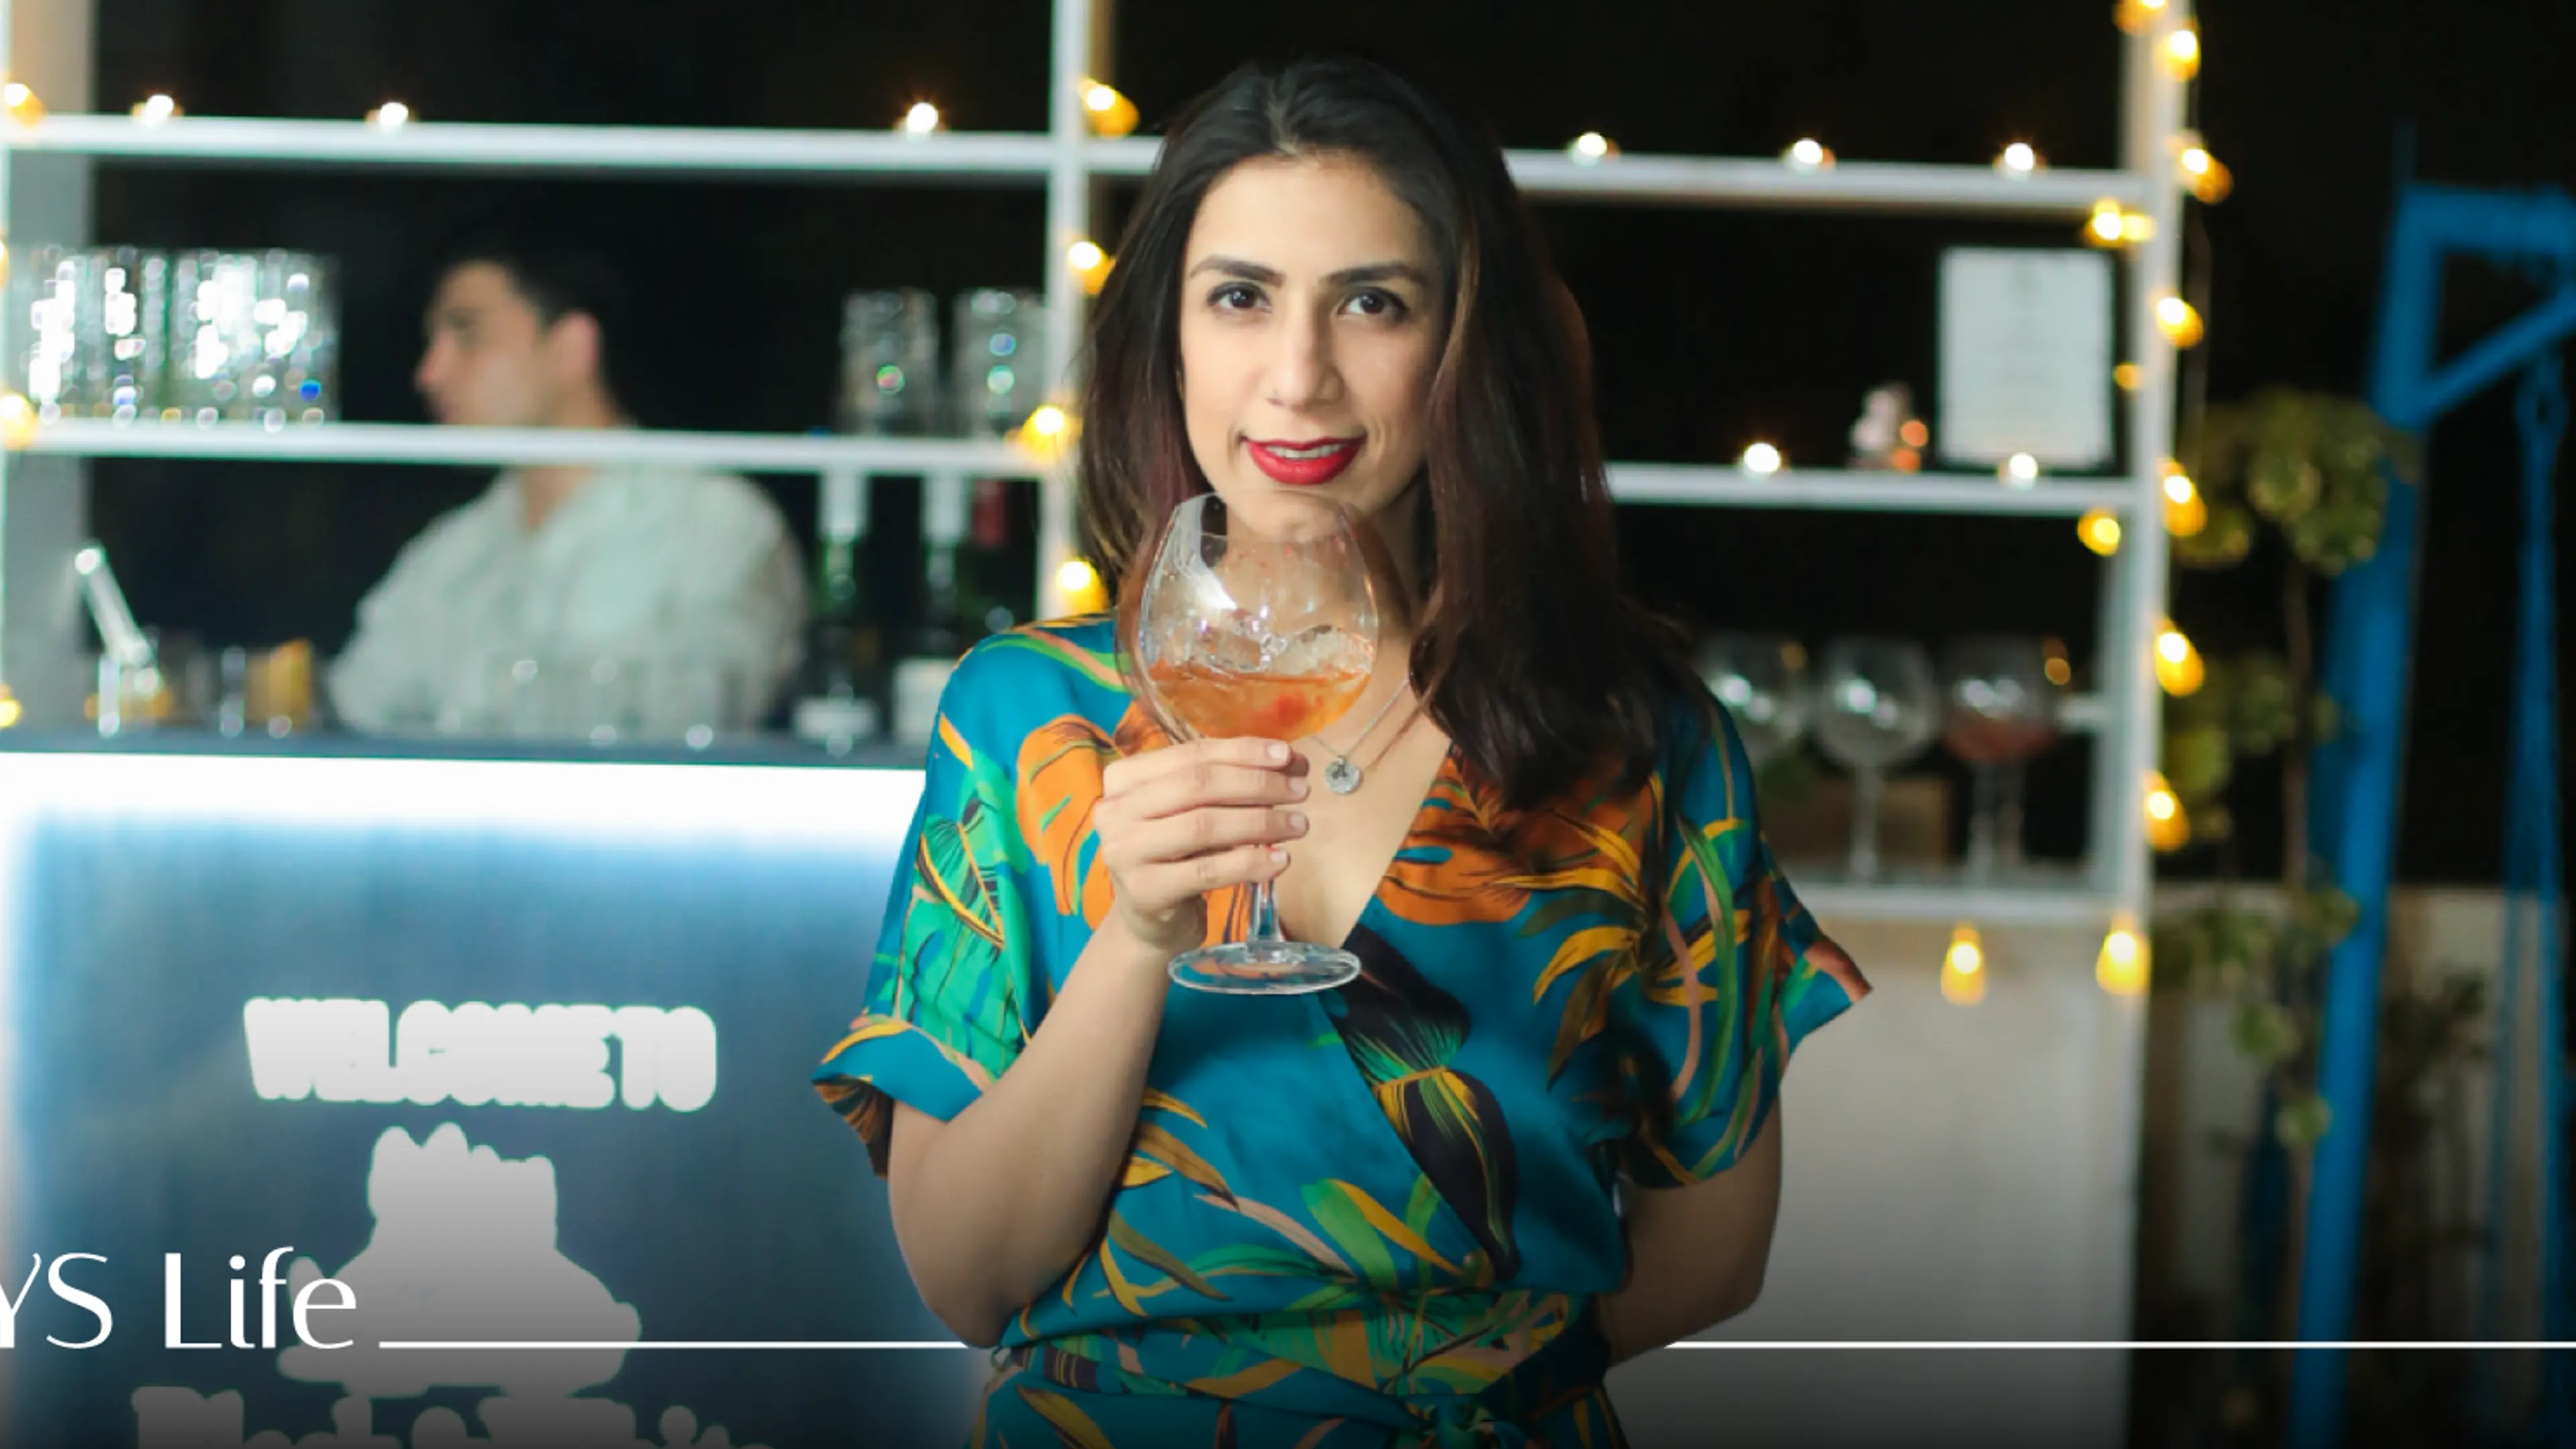 Every gin has a story and a unique persona, says Anthem founder Anjali Batra